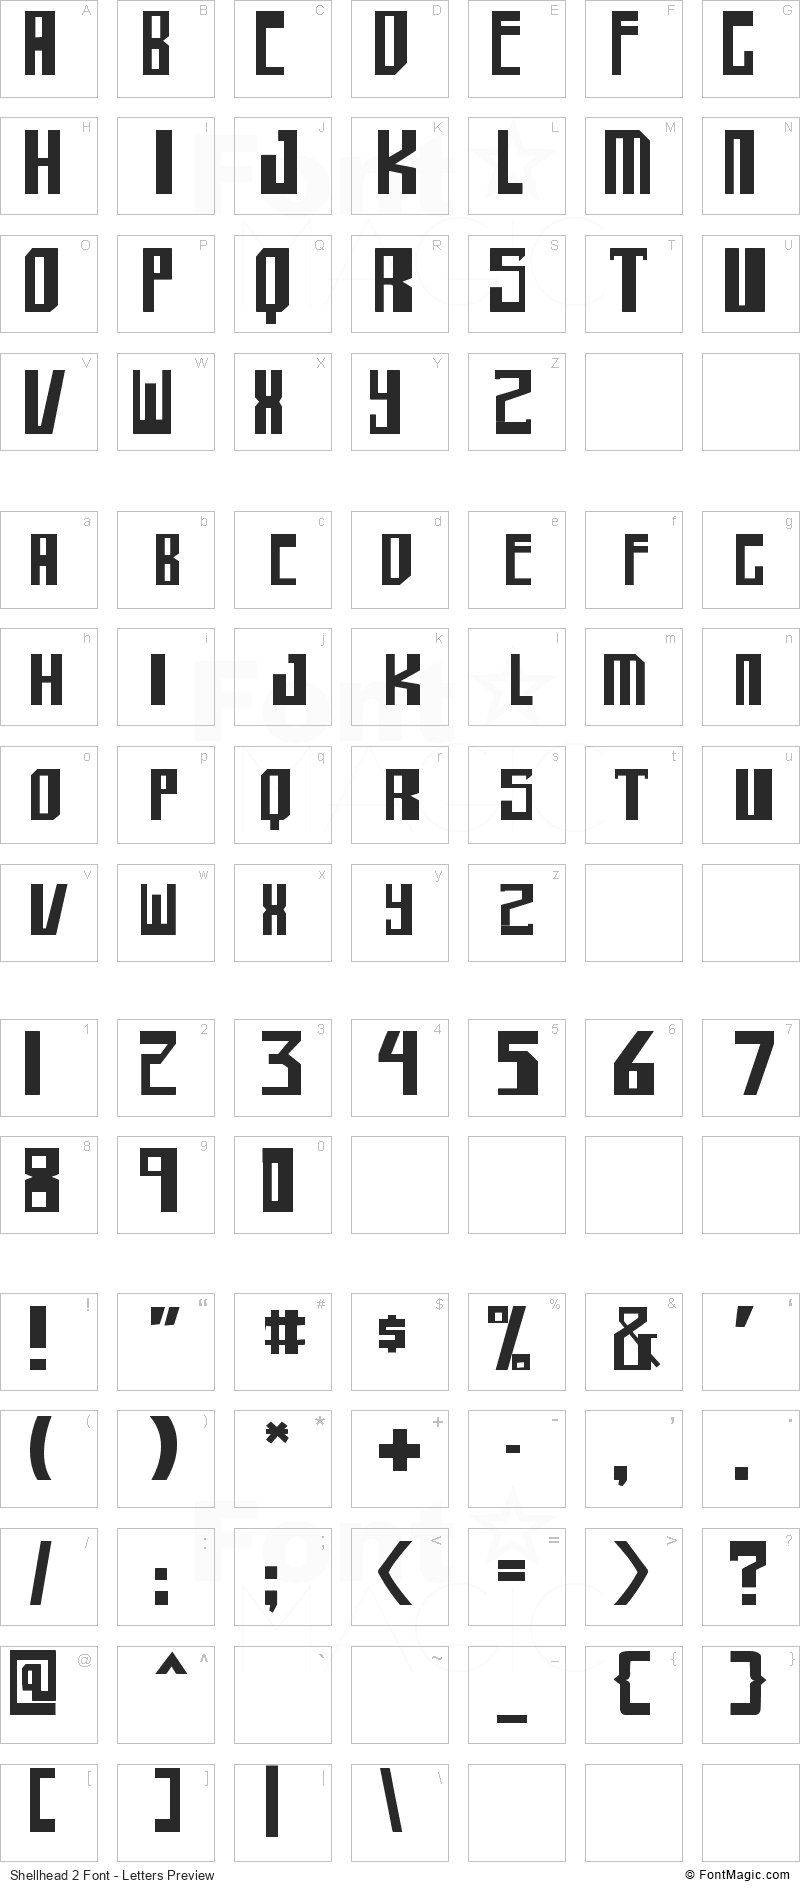 Shellhead 2 Font - All Latters Preview Chart